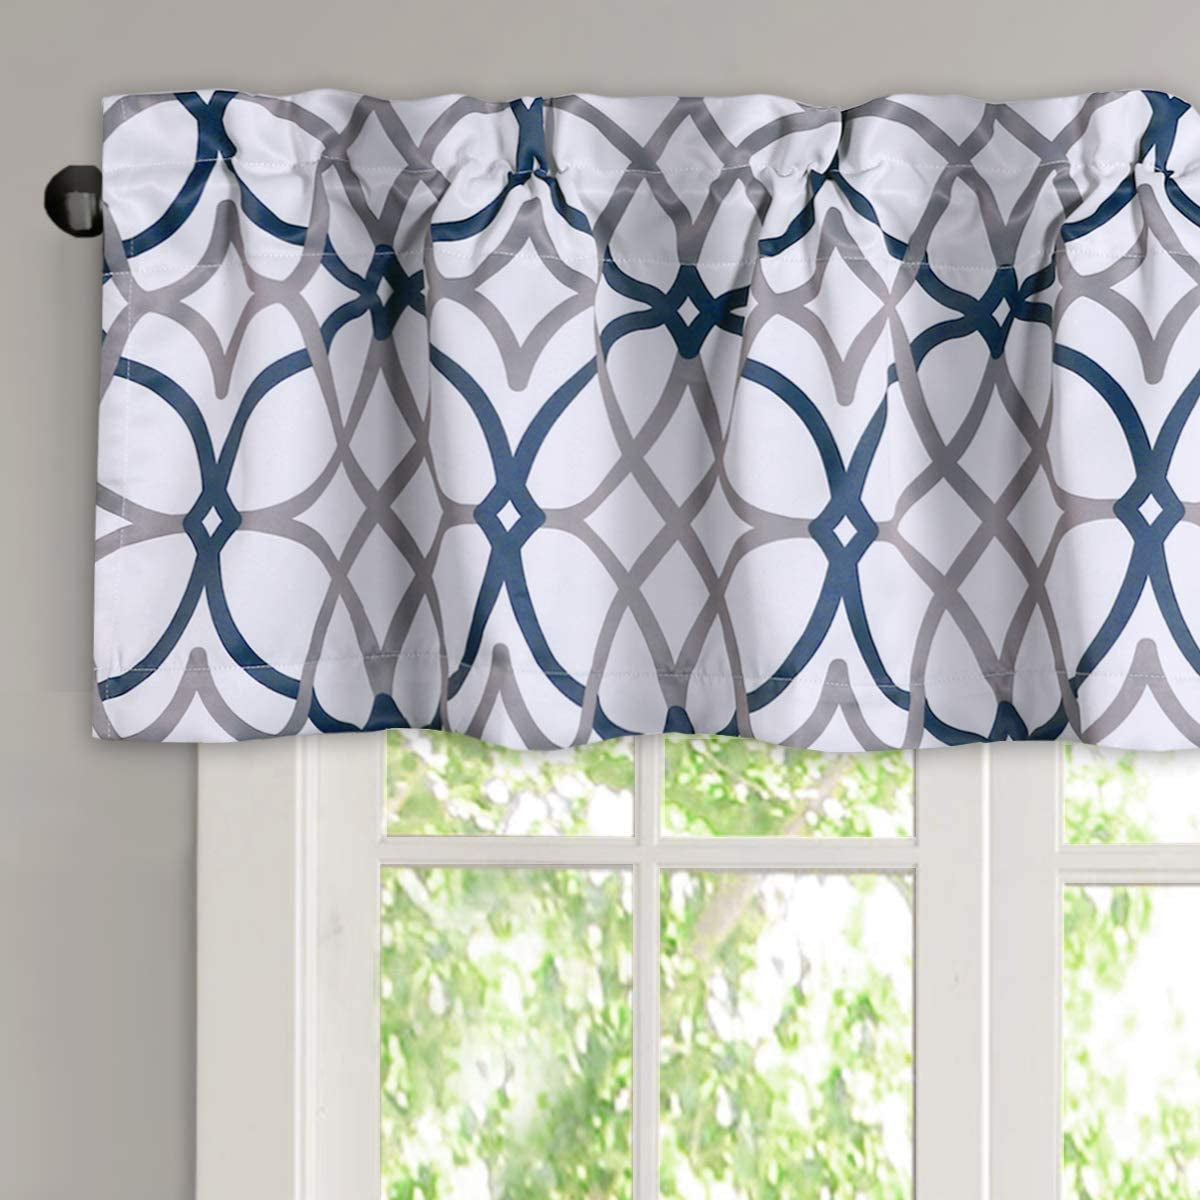 Blackout Curtain Valances for Kitchen/Bathroom - Thermal Insulated Window Valances for Living Room/Bedroom Rod Pocket Short Curtain 1 Panel, 52X18 Inch, Geo in Grey and Navy